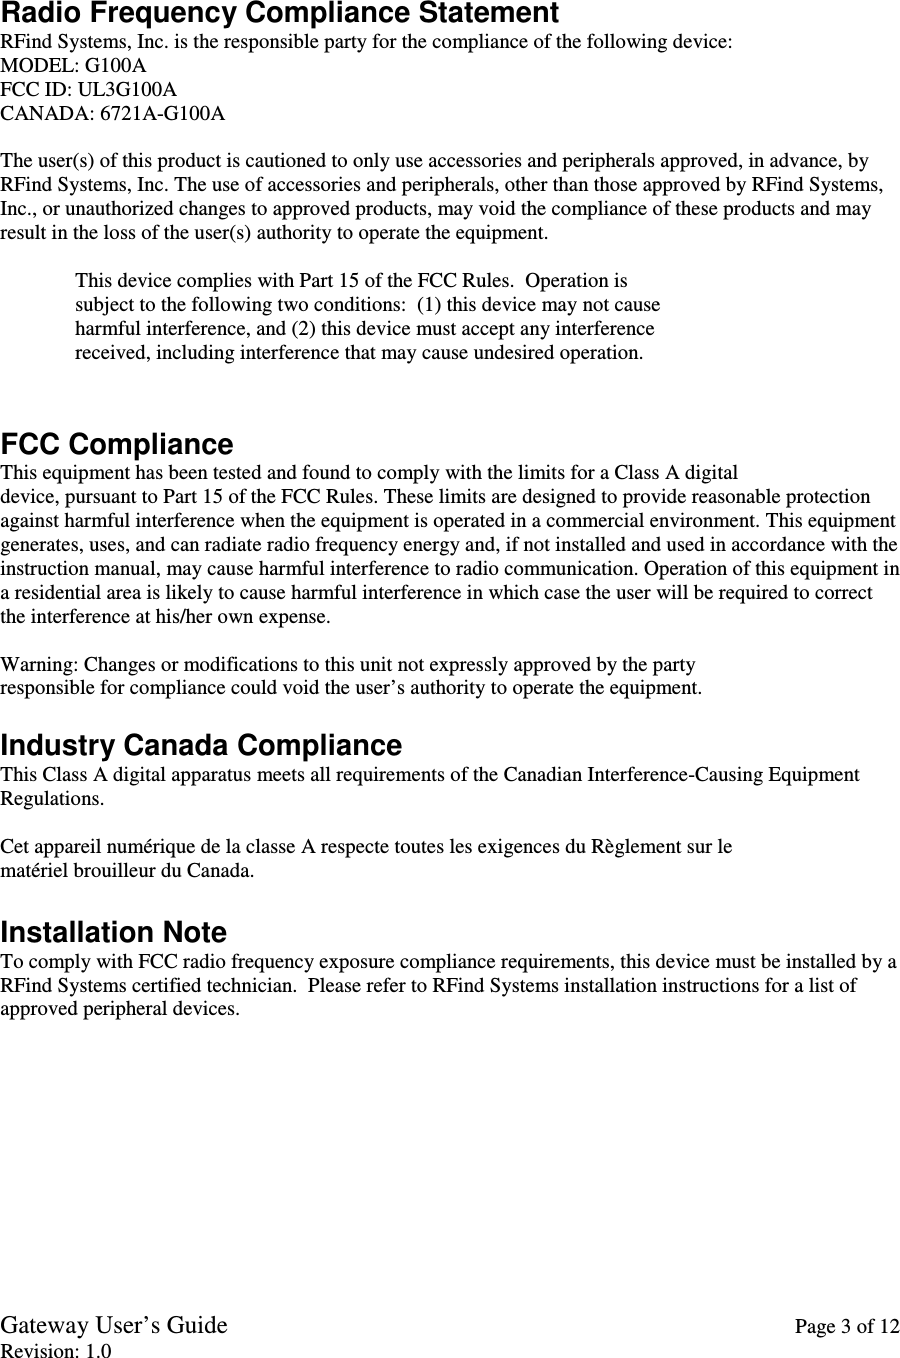 Gateway User’s Guide    Page 3 of 12 Revision: 1.0   Radio Frequency Compliance Statement RFind Systems, Inc. is the responsible party for the compliance of the following device: MODEL: G100A FCC ID: UL3G100A CANADA: 6721A-G100A  The user(s) of this product is cautioned to only use accessories and peripherals approved, in advance, by RFind Systems, Inc. The use of accessories and peripherals, other than those approved by RFind Systems, Inc., or unauthorized changes to approved products, may void the compliance of these products and may result in the loss of the user(s) authority to operate the equipment.  This device complies with Part 15 of the FCC Rules.  Operation is             subject to the following two conditions:  (1) this device may not cause               harmful interference, and (2) this device must accept any interference               received, including interference that may cause undesired operation.   FCC Compliance This equipment has been tested and found to comply with the limits for a Class A digital device, pursuant to Part 15 of the FCC Rules. These limits are designed to provide reasonable protection against harmful interference when the equipment is operated in a commercial environment. This equipment generates, uses, and can radiate radio frequency energy and, if not installed and used in accordance with the instruction manual, may cause harmful interference to radio communication. Operation of this equipment in a residential area is likely to cause harmful interference in which case the user will be required to correct the interference at his/her own expense.  Warning: Changes or modifications to this unit not expressly approved by the party responsible for compliance could void the user’s authority to operate the equipment.  Industry Canada Compliance This Class A digital apparatus meets all requirements of the Canadian Interference-Causing Equipment Regulations.  Cet appareil numérique de la classe A respecte toutes les exigences du Règlement sur le matériel brouilleur du Canada.  Installation Note To comply with FCC radio frequency exposure compliance requirements, this device must be installed by a RFind Systems certified technician.  Please refer to RFind Systems installation instructions for a list of approved peripheral devices.